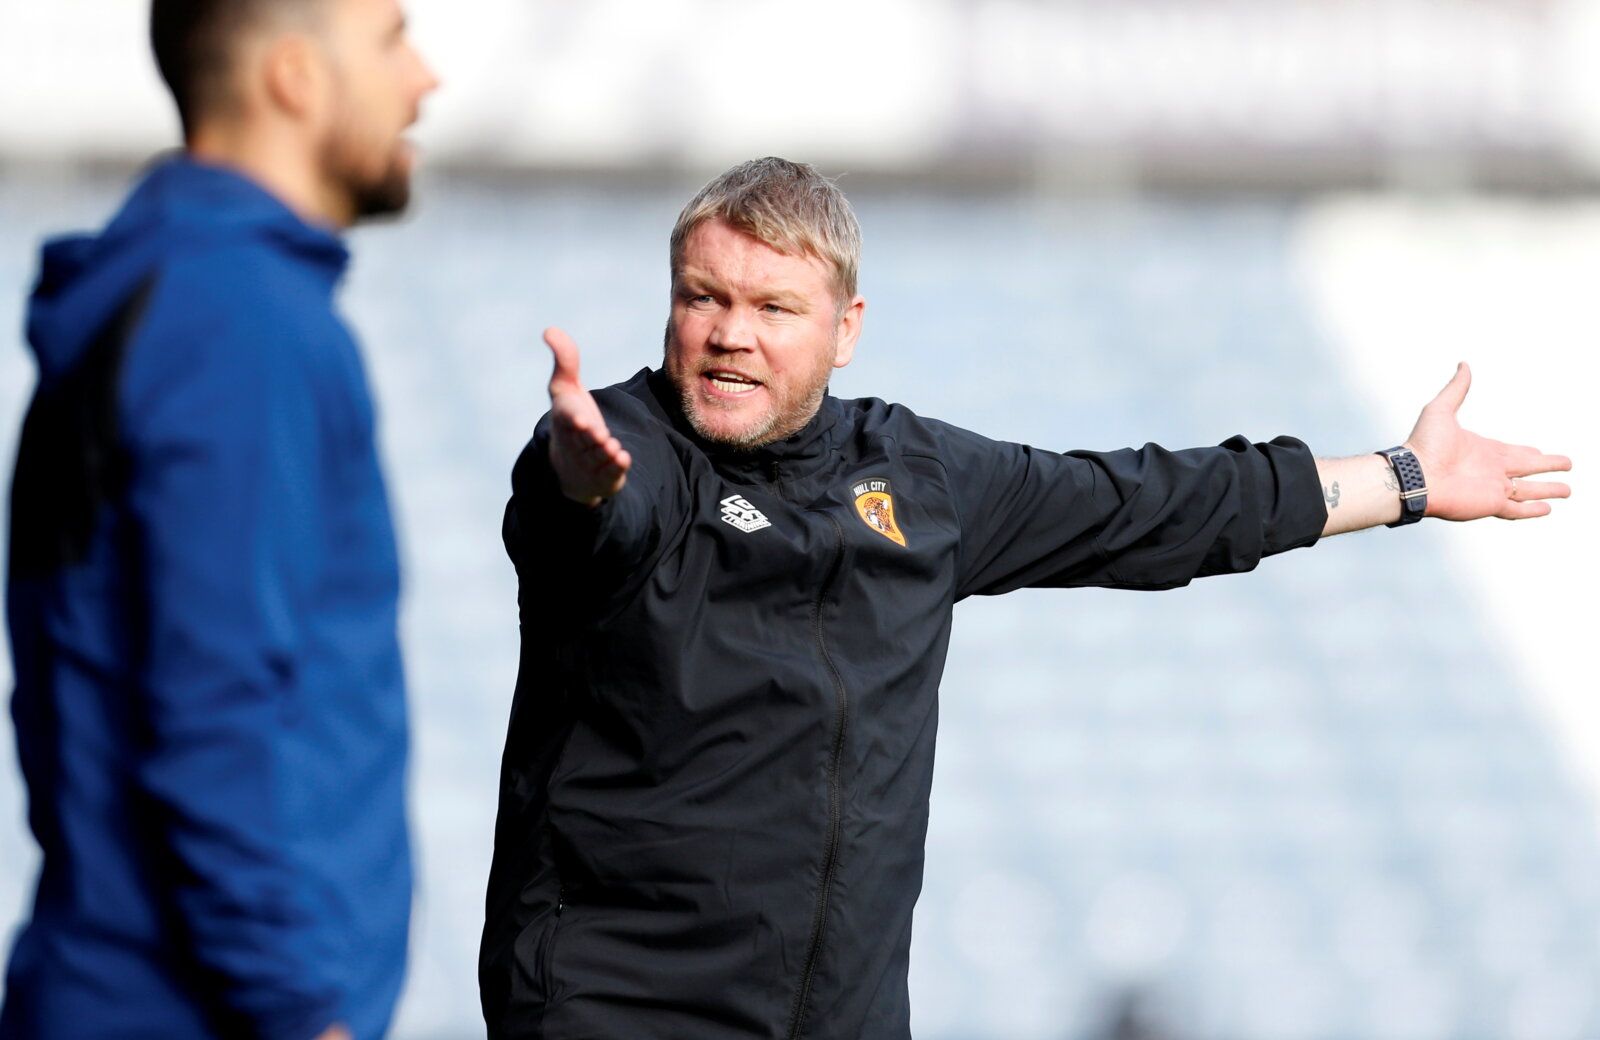 Soccer Football - Championship - Huddersfield Town v Hull City - John Smith's Stadium, Huddersfield, Britain - October 16, 2021 Hull City manager Grant McCann reacts  Action Images/Ed Sykes  EDITORIAL USE ONLY. No use with unauthorized audio, video, data, fixture lists, club/league logos or 